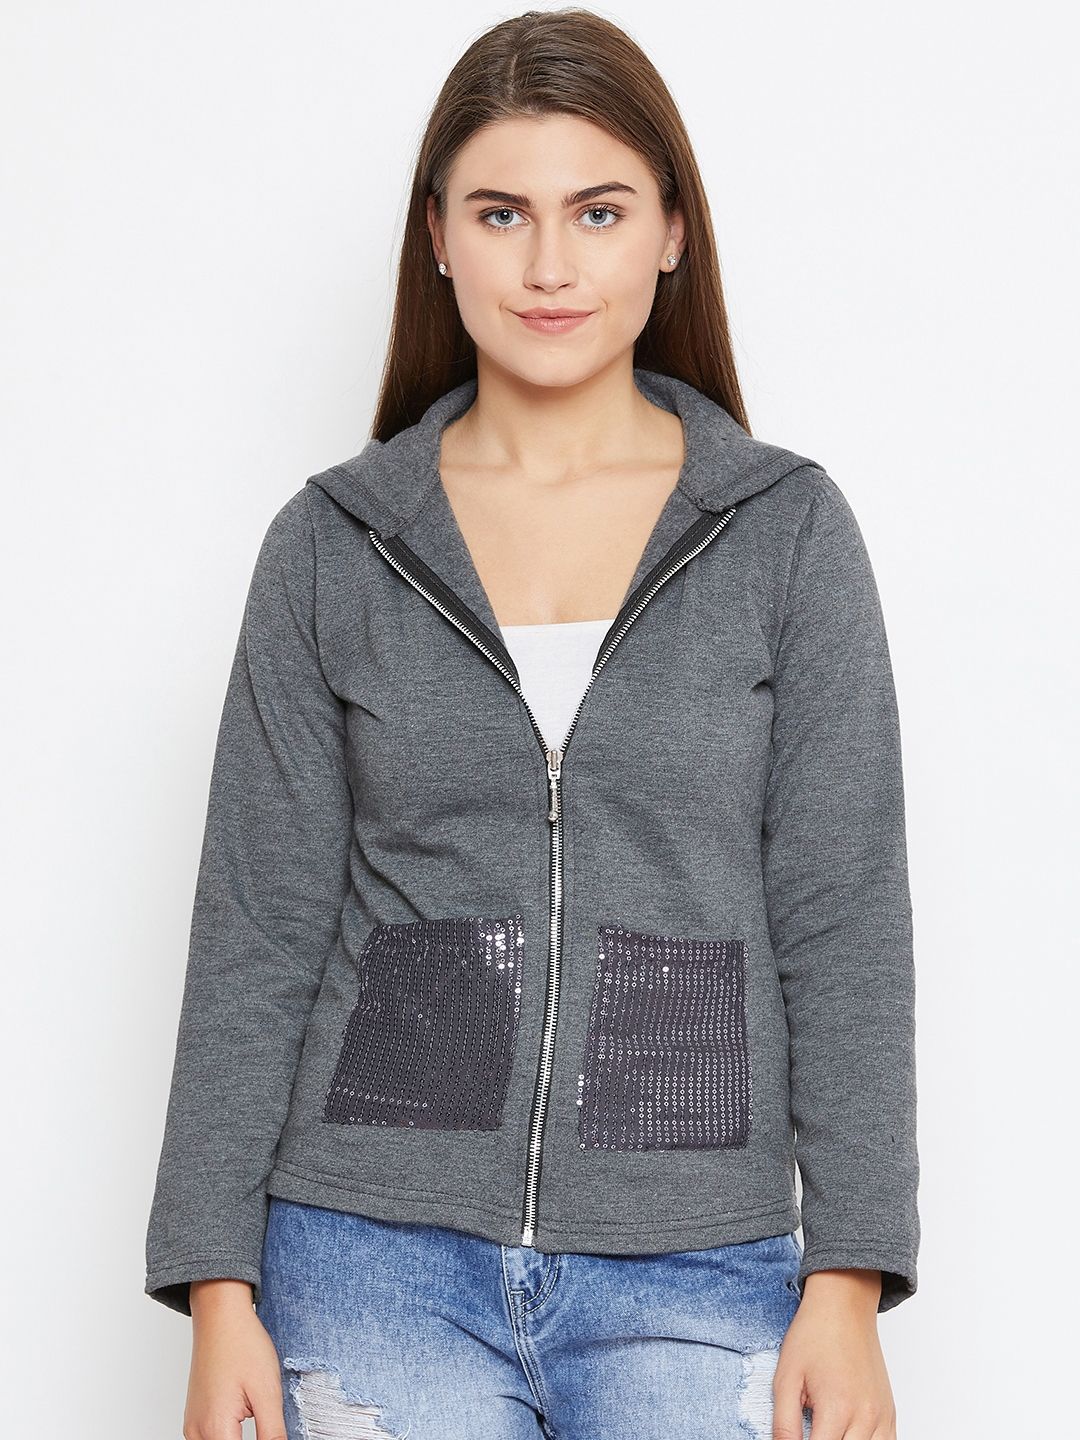 Belle Fille Women Charcoal Grey Solid Hooded Jacket Price in India